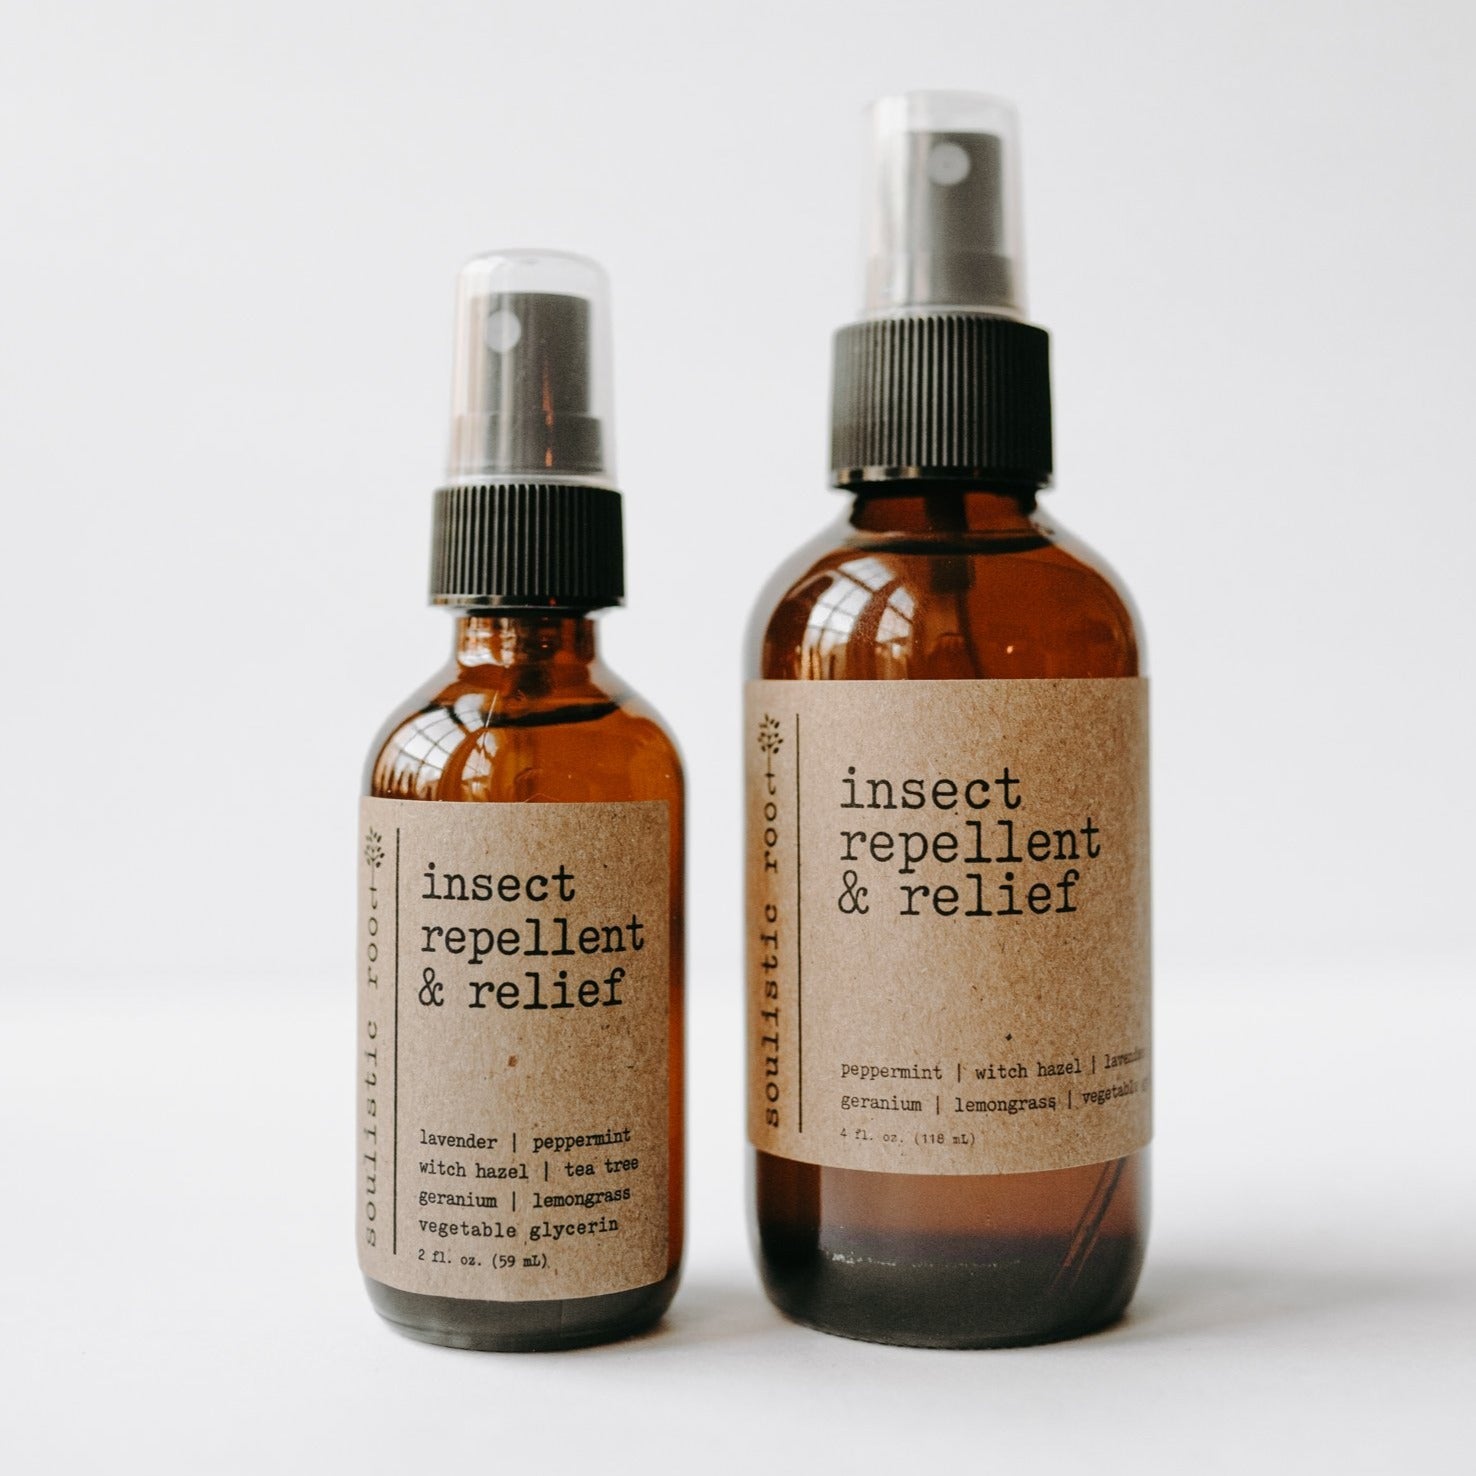 Bug spray that is an insect repellent and bug bite relief. 2 oz and 4 oz amber spray bottles